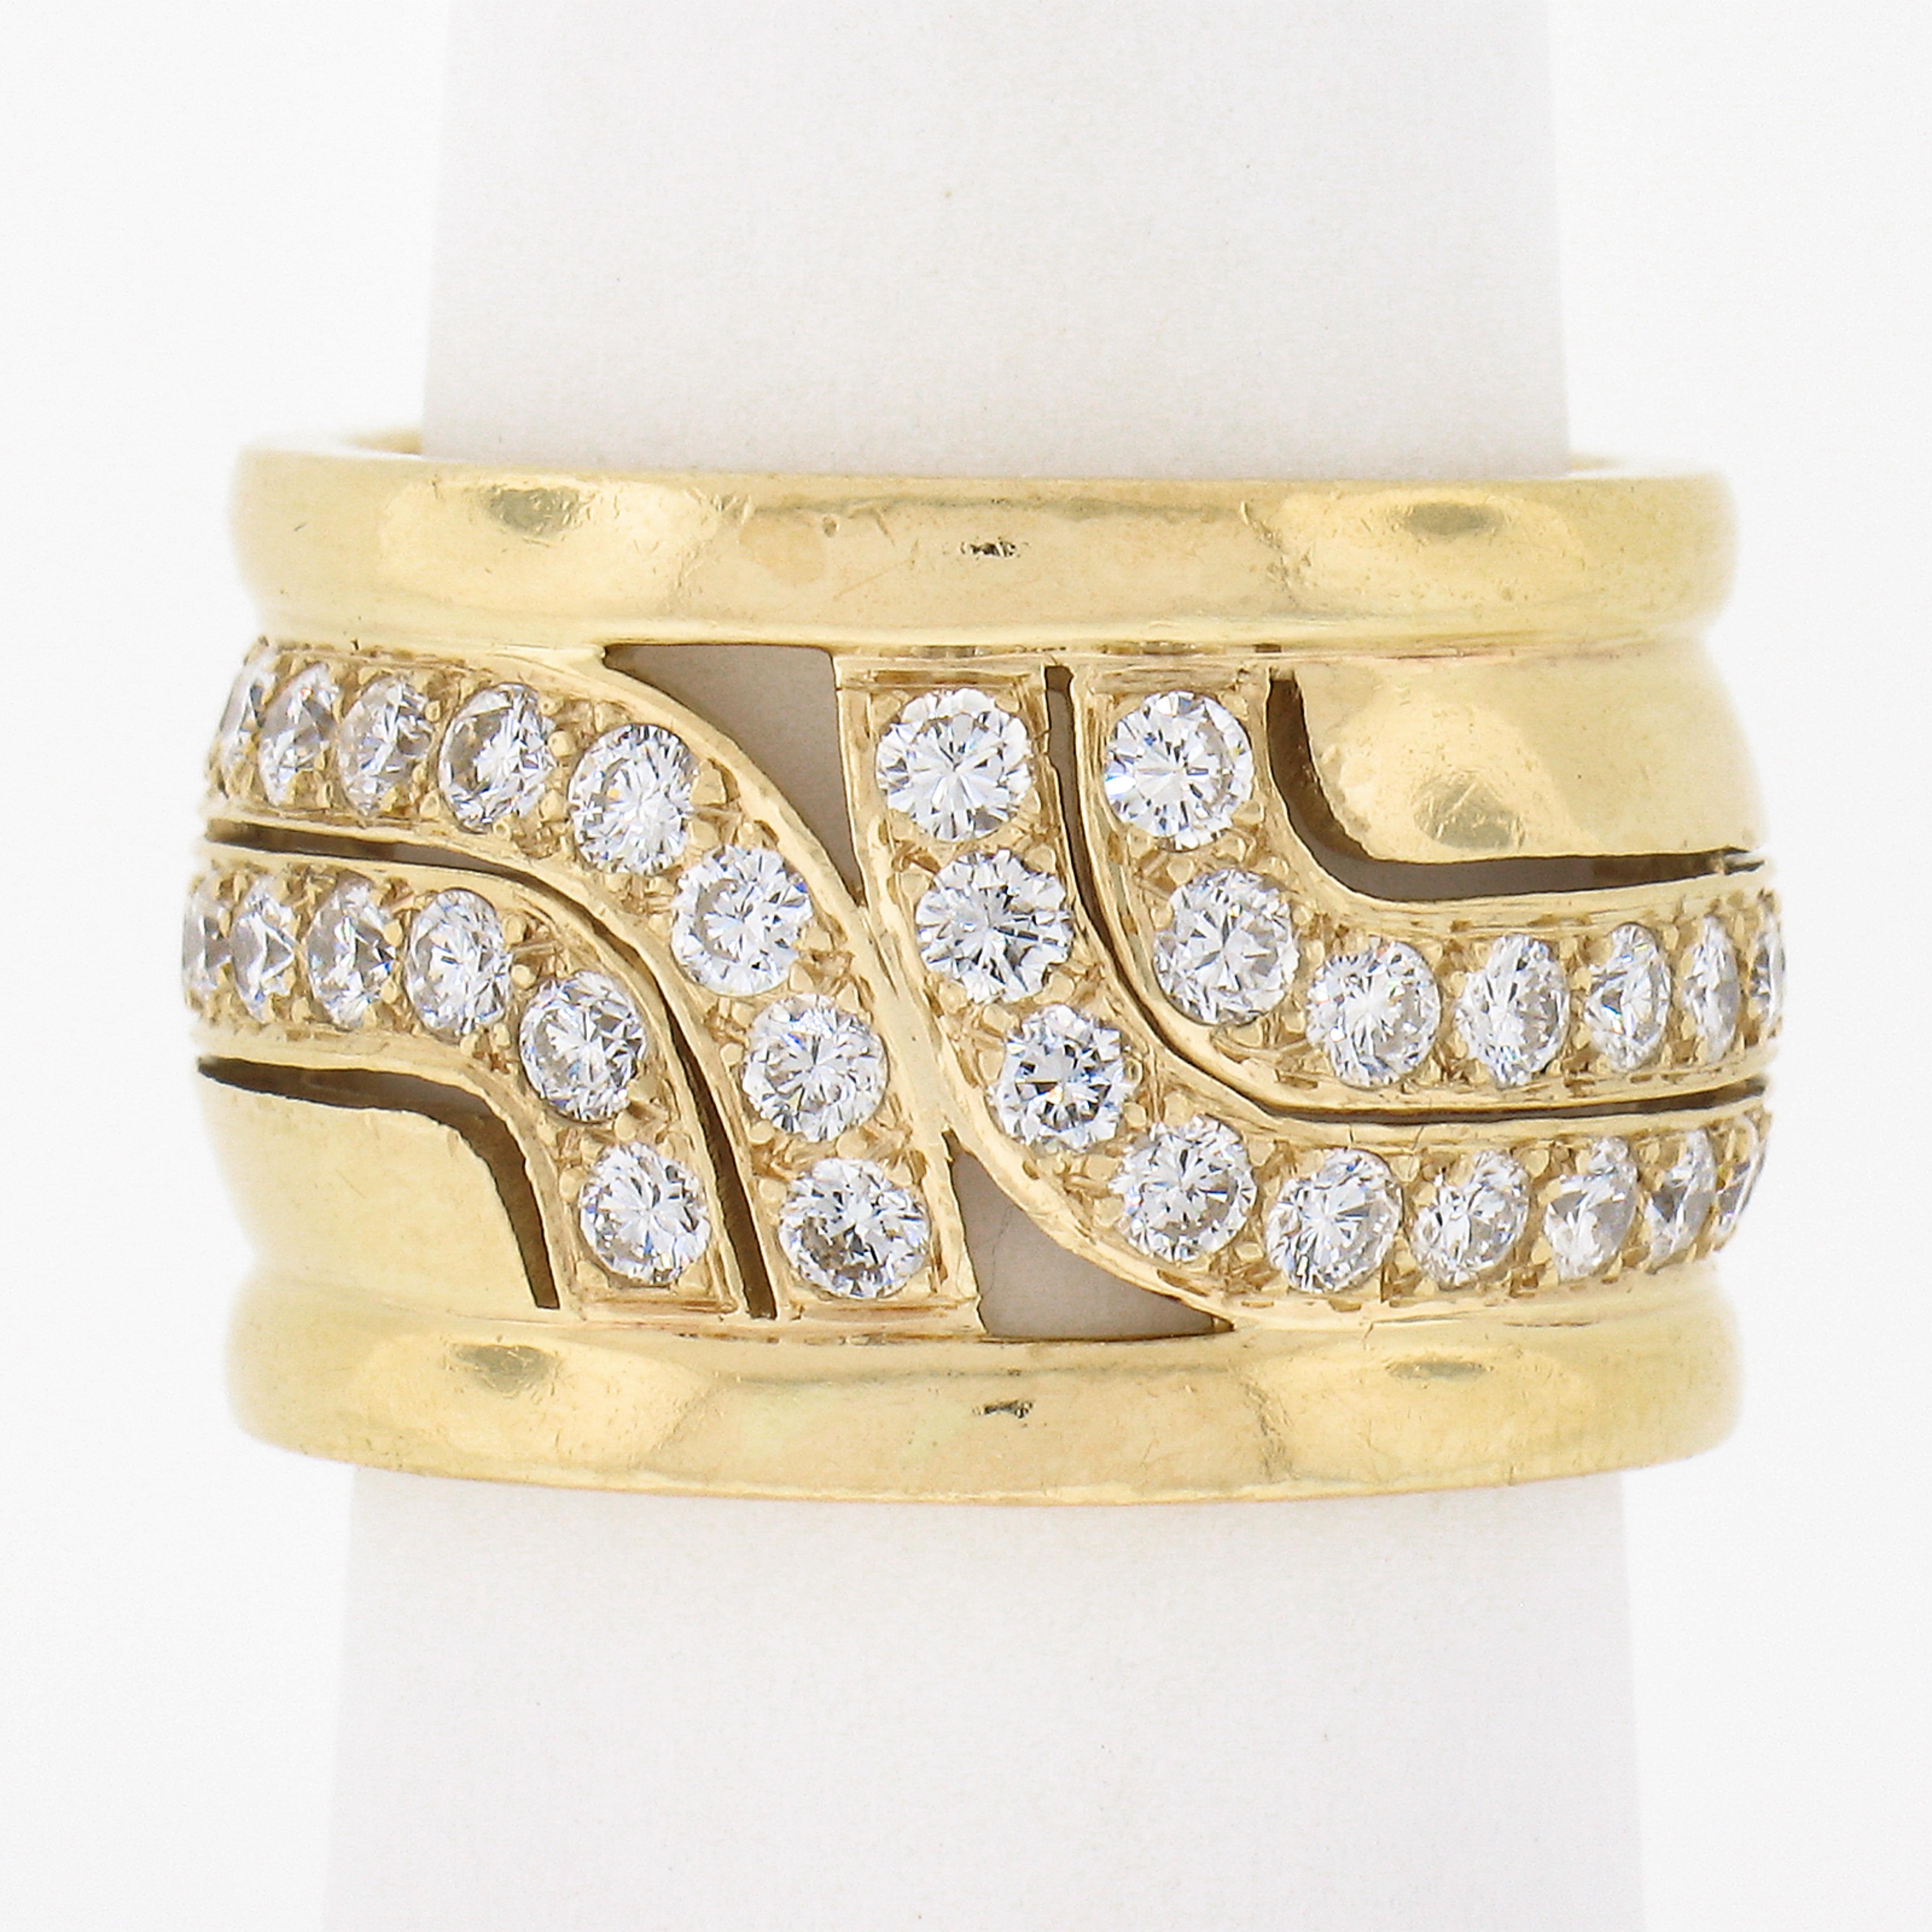 Up for sale is this rare vintage Cartier diamond band ring crafted in France from solid 18k yellow gold and properly signed with their unique serial number and stamped with the French eagle's head hallmarks. The excellent cut diamonds are so neatly